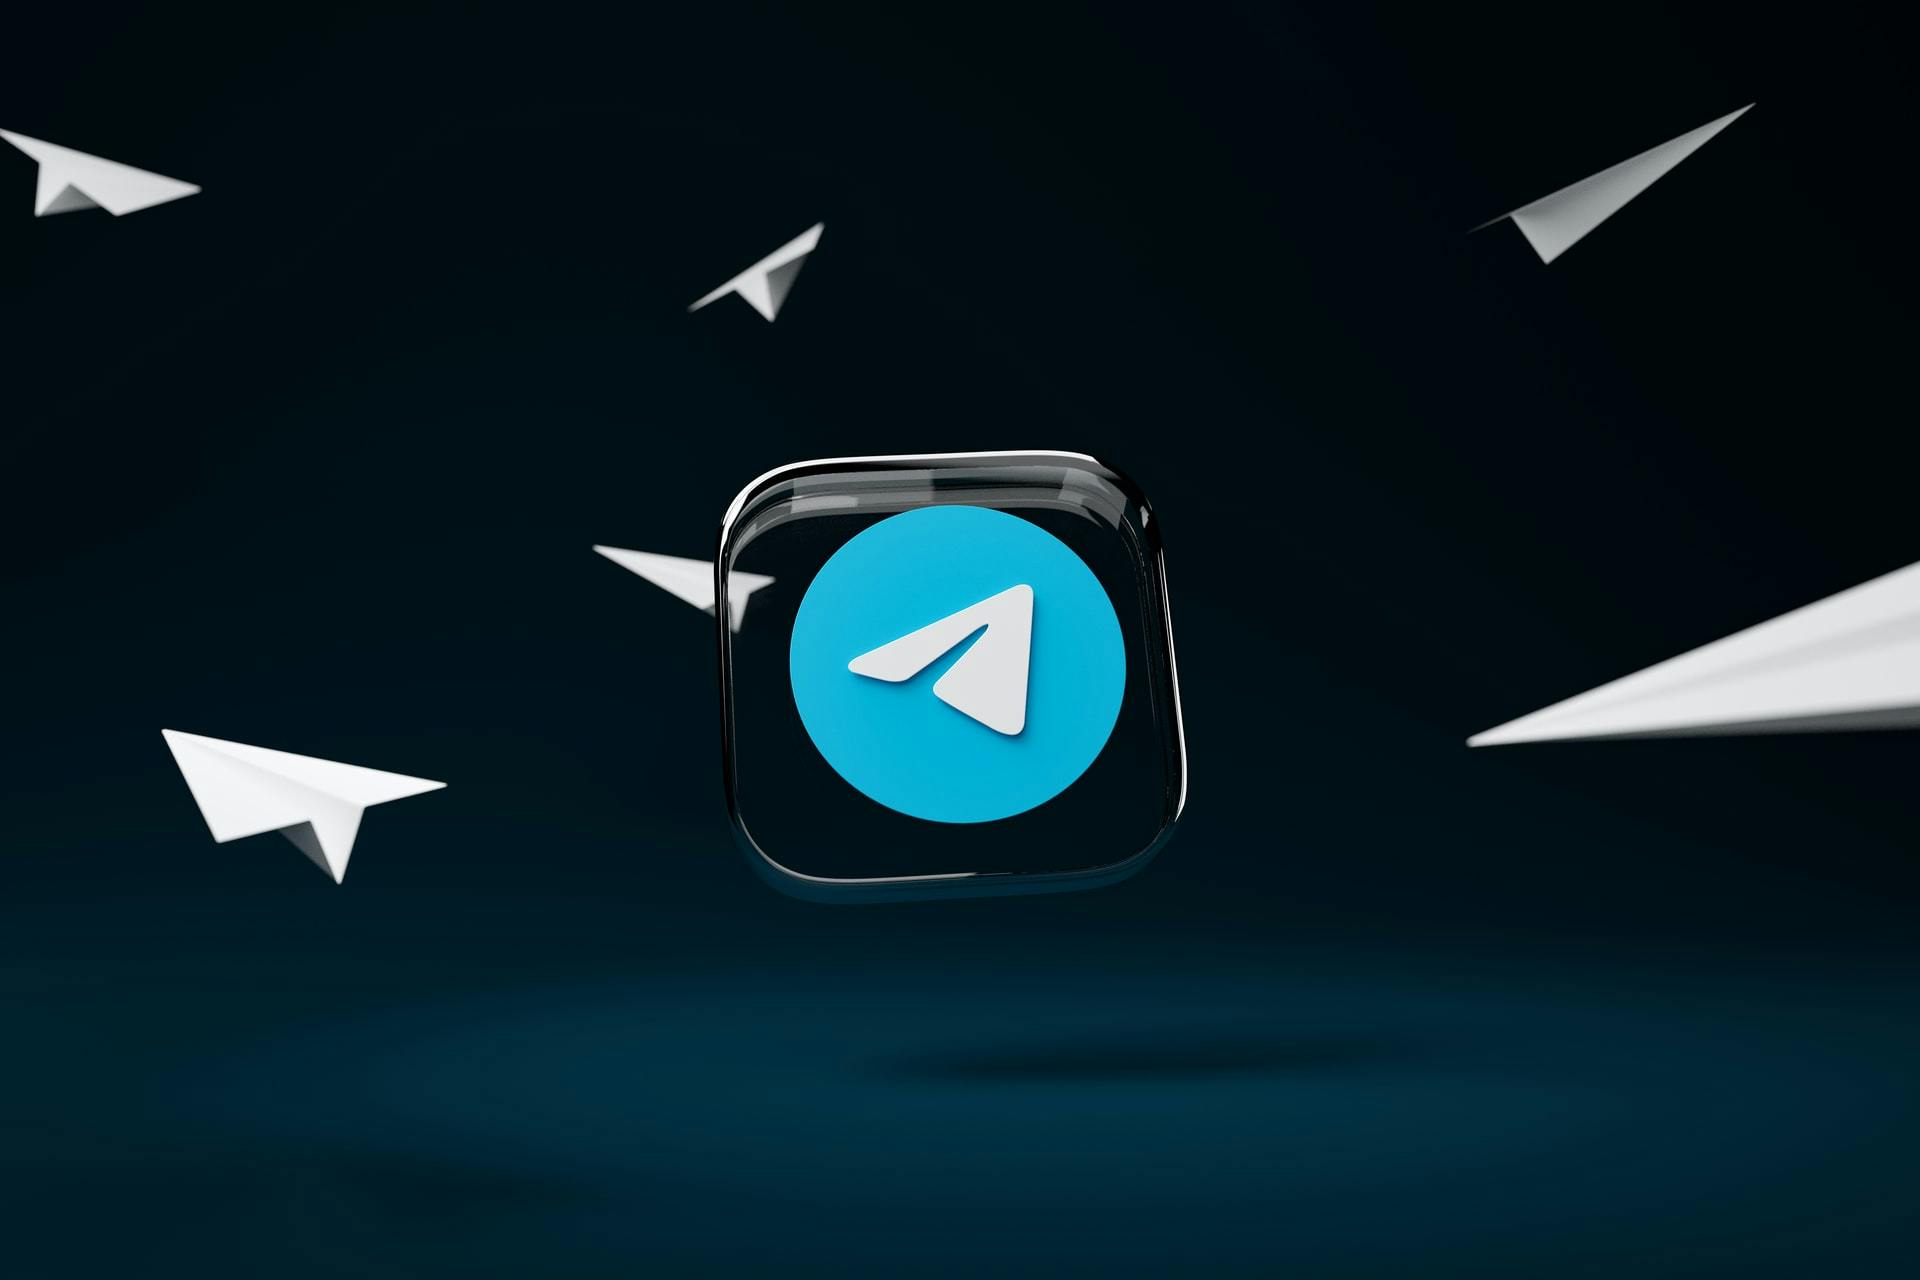 How Telegram Gained Hundreds of Millions of Users So Fast